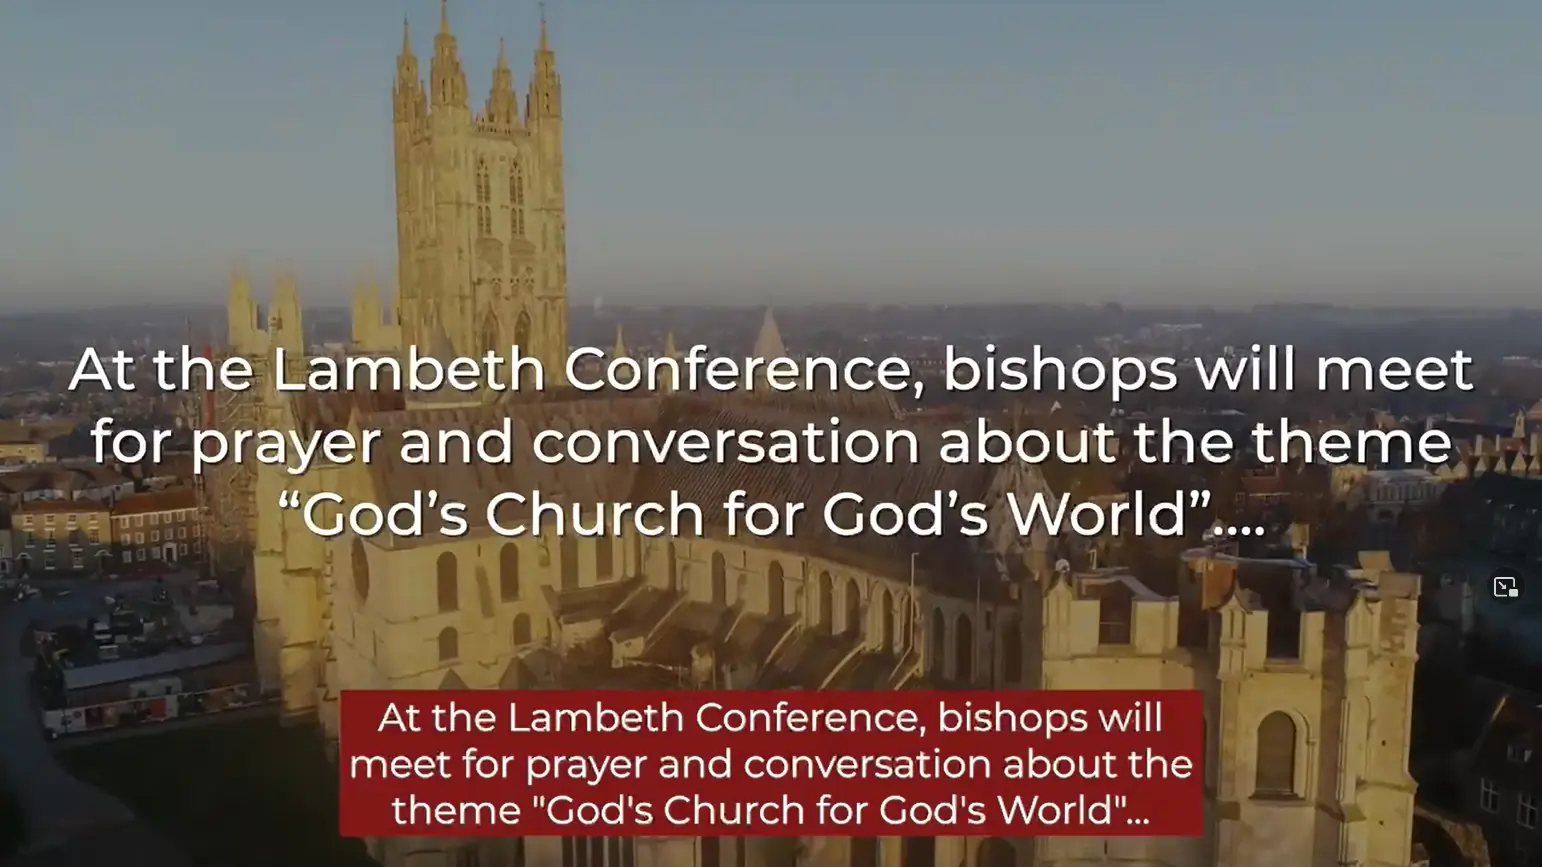 At the Lambeth Conference, bishops will meet for prayer and conversation about the theme 'God's Church for God's World'...